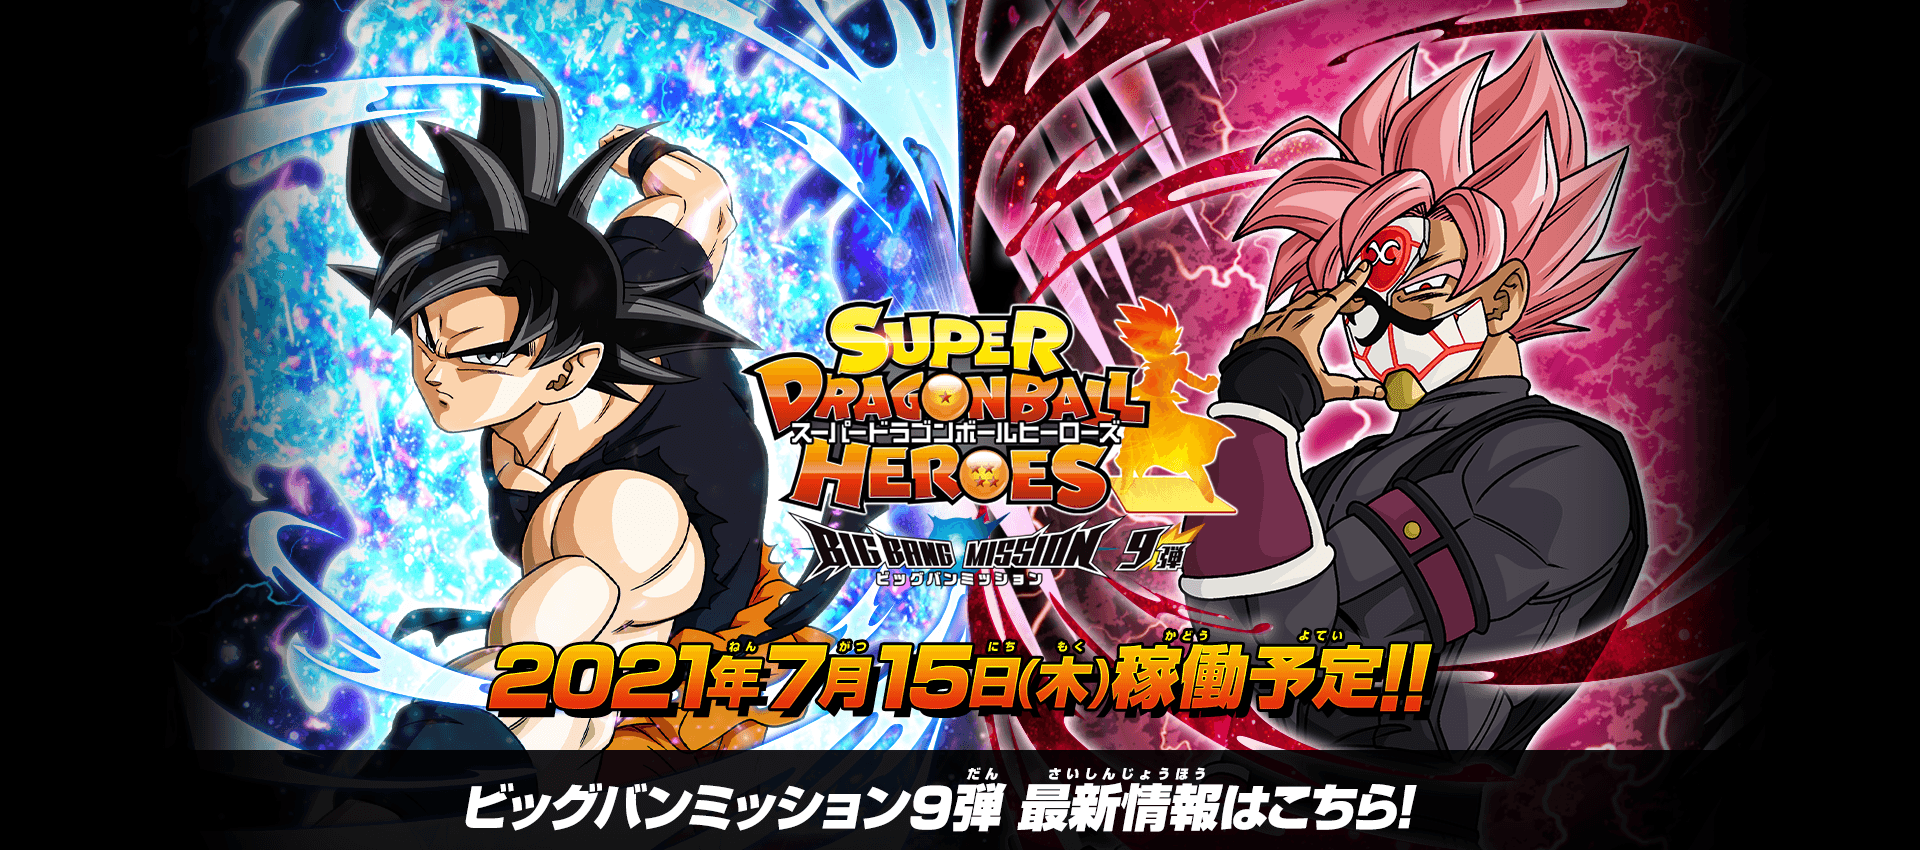 A Super Hero rose this weekend with Dragon Ball Super: Super Hero